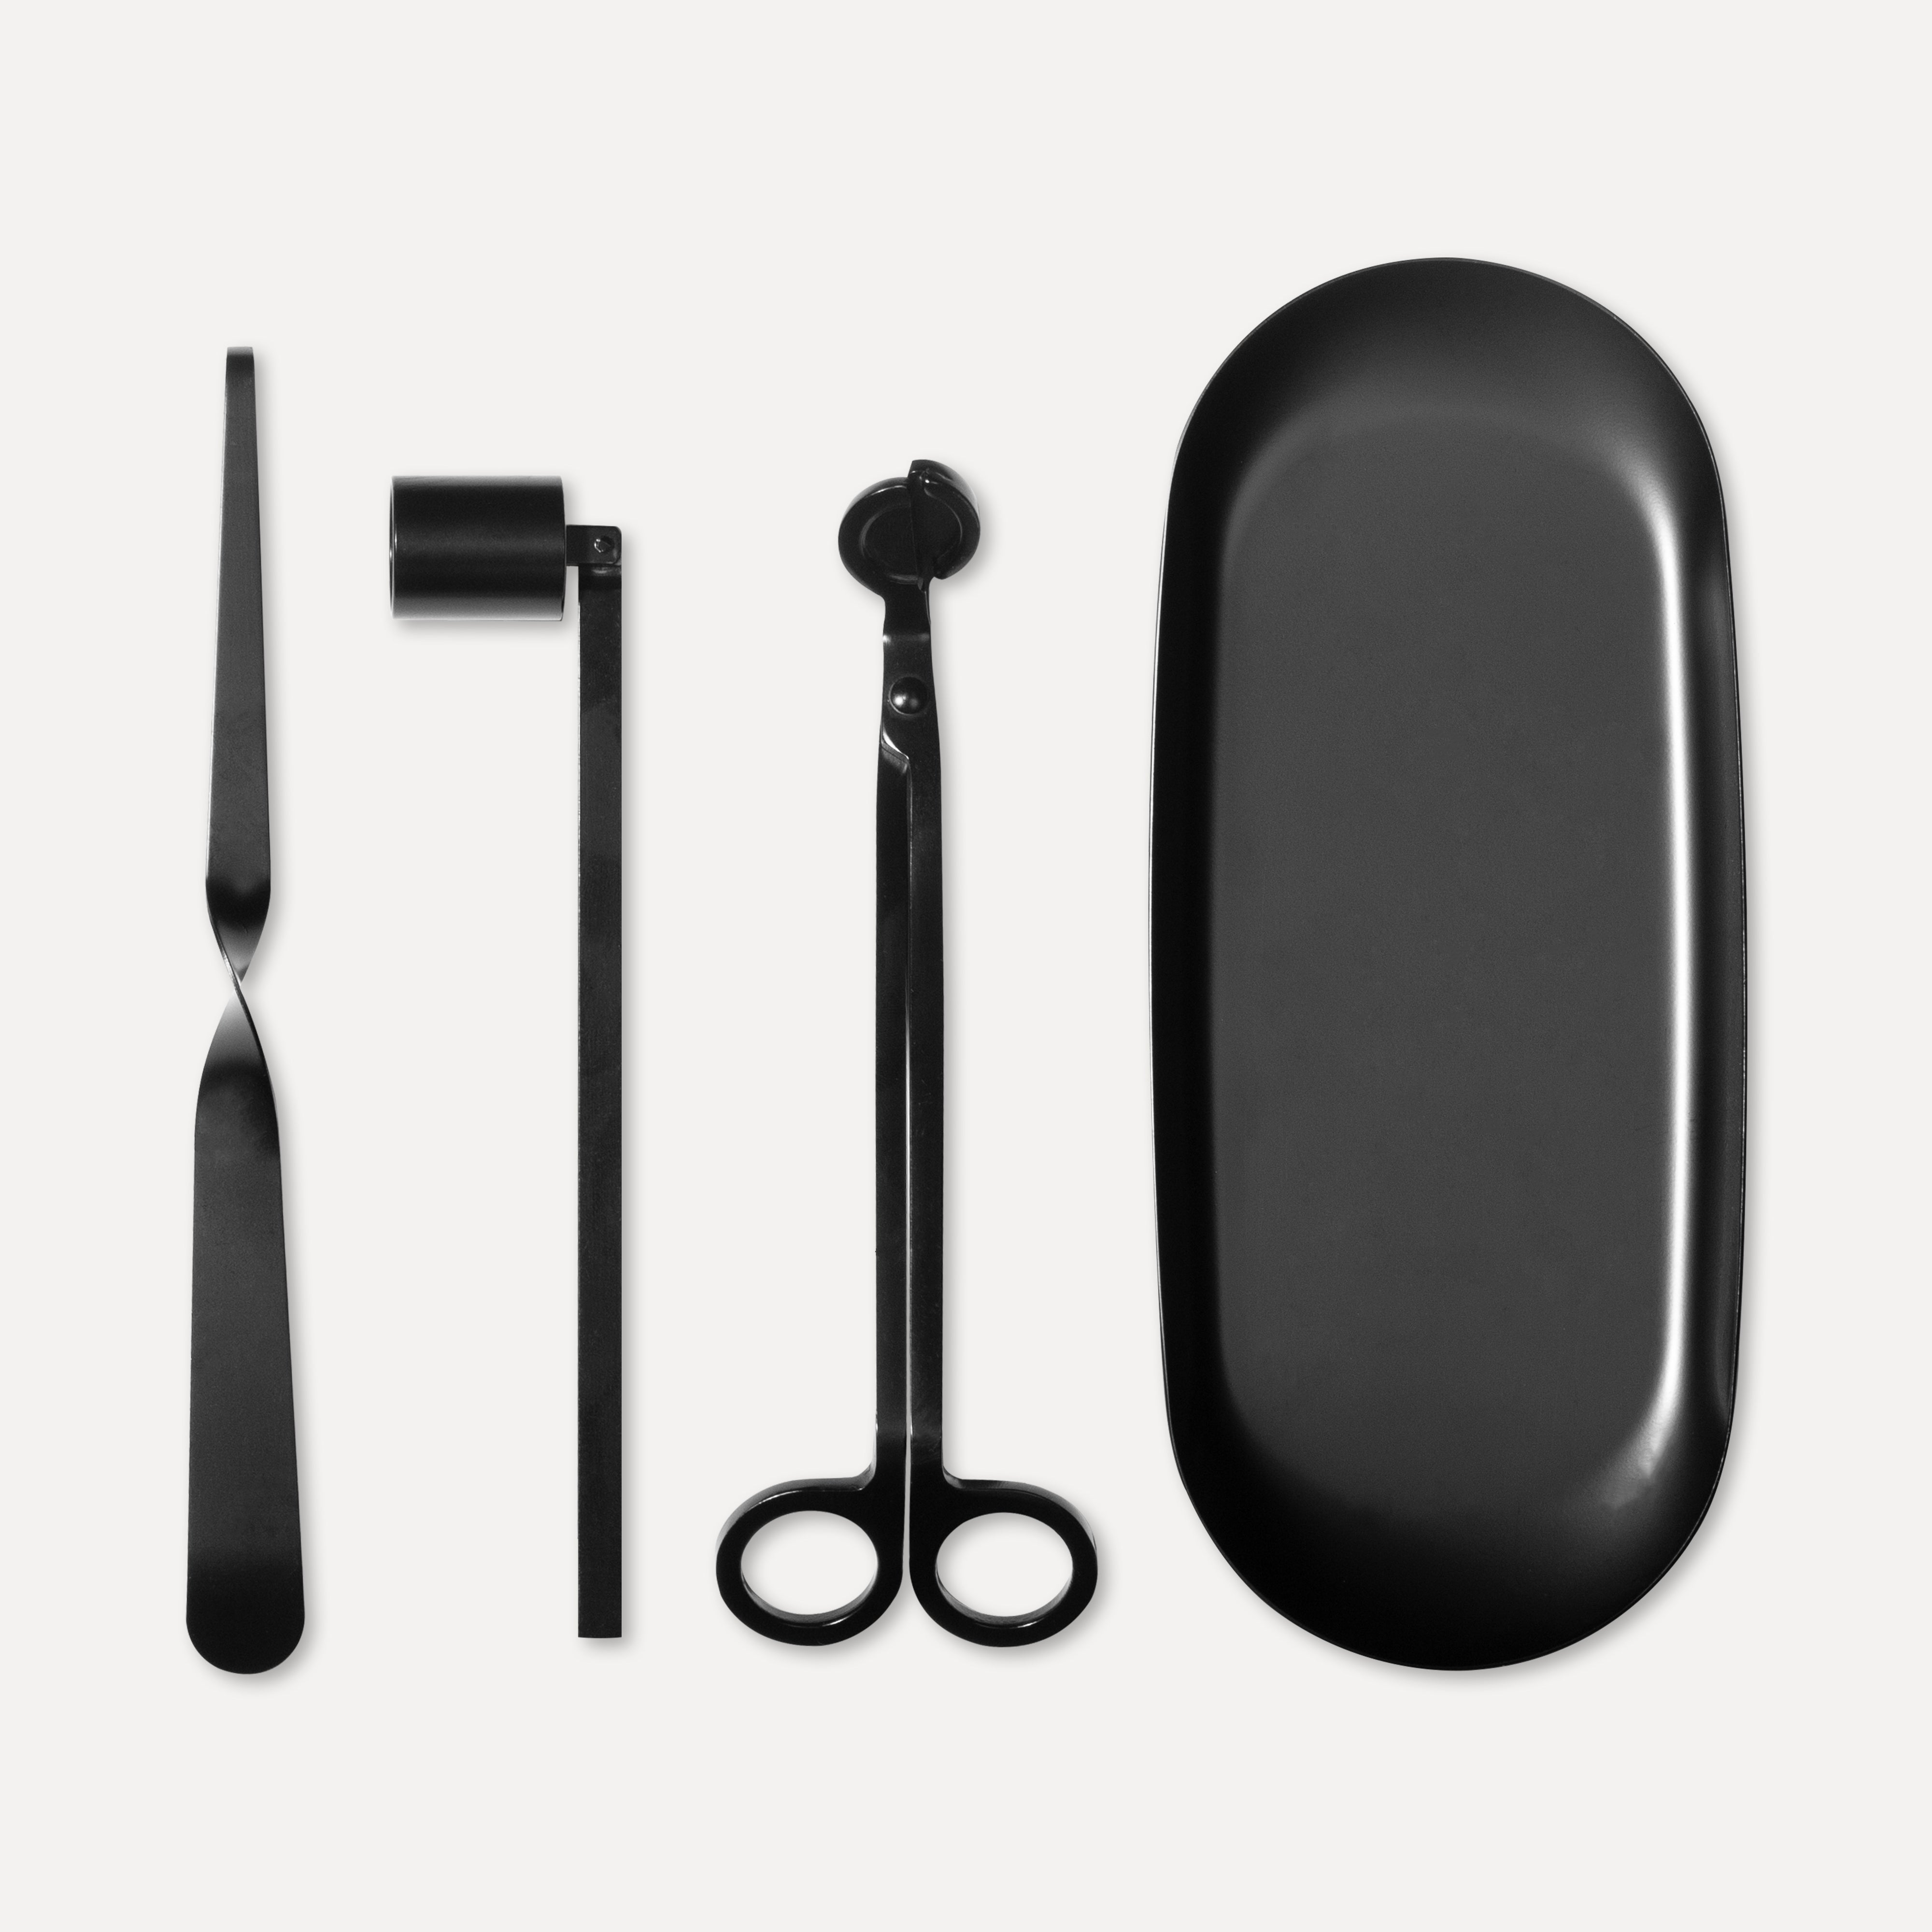 Candle Wick Trimmer, Snuffer and Dipper Set (Black) - VAUCLUSE